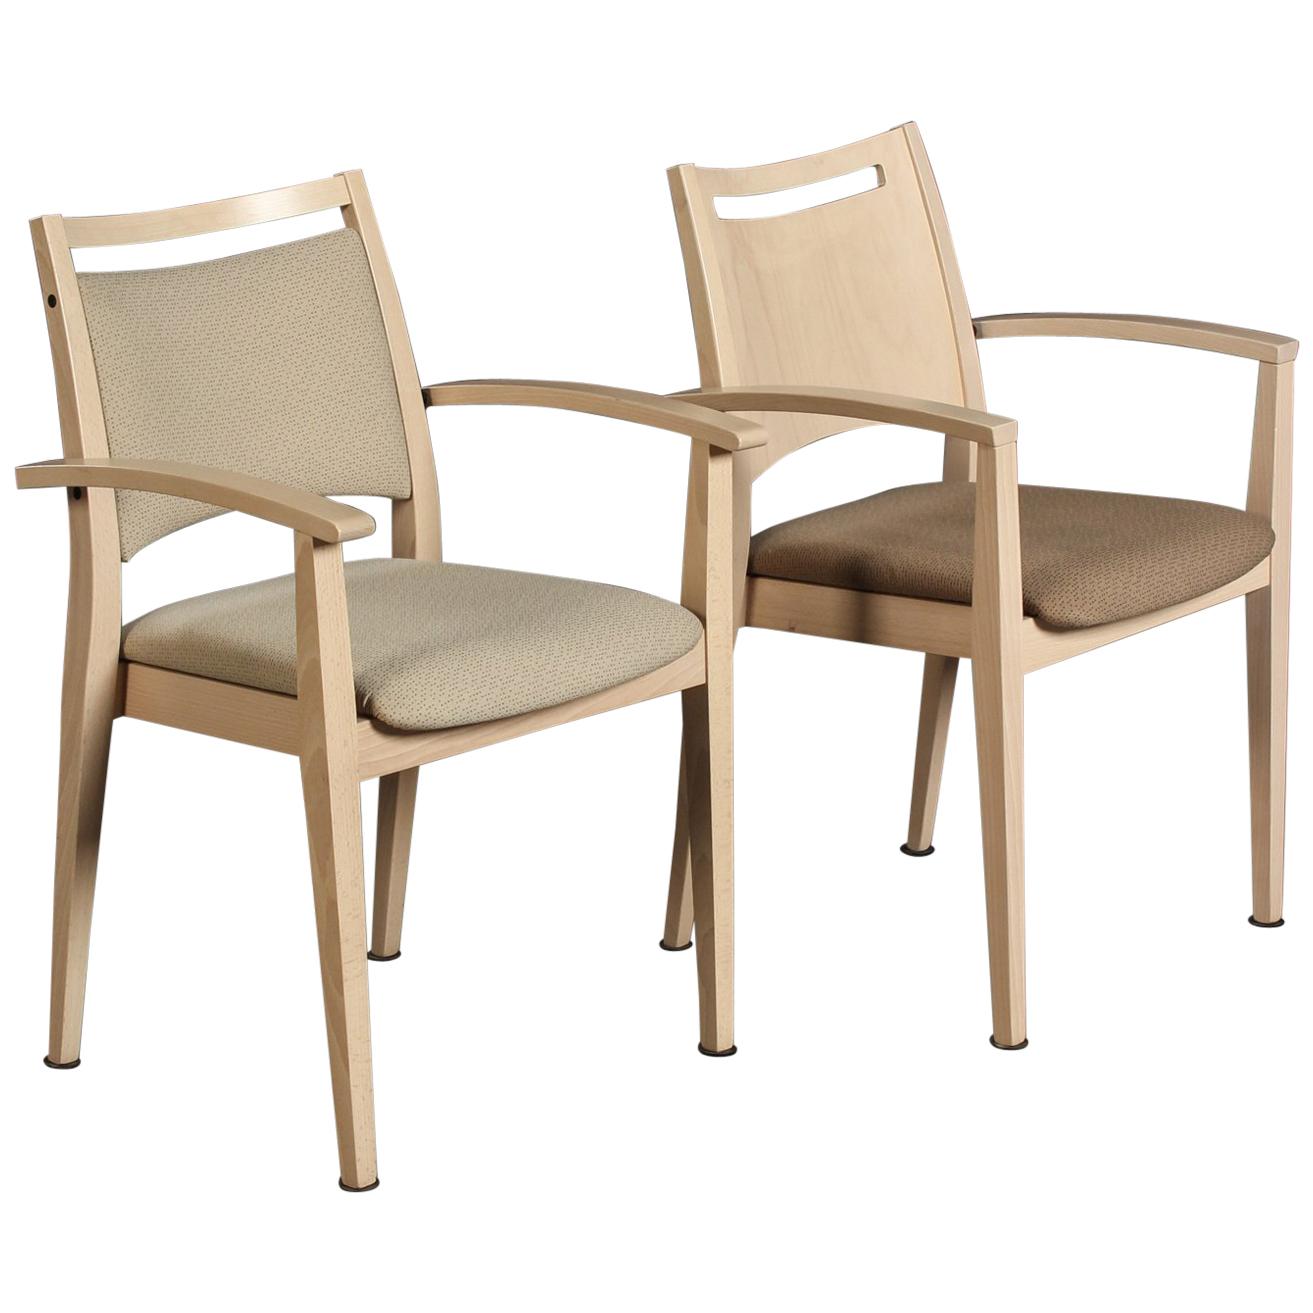 Pair of Buena Nova Chairs by Roland Schmidt for Brunner